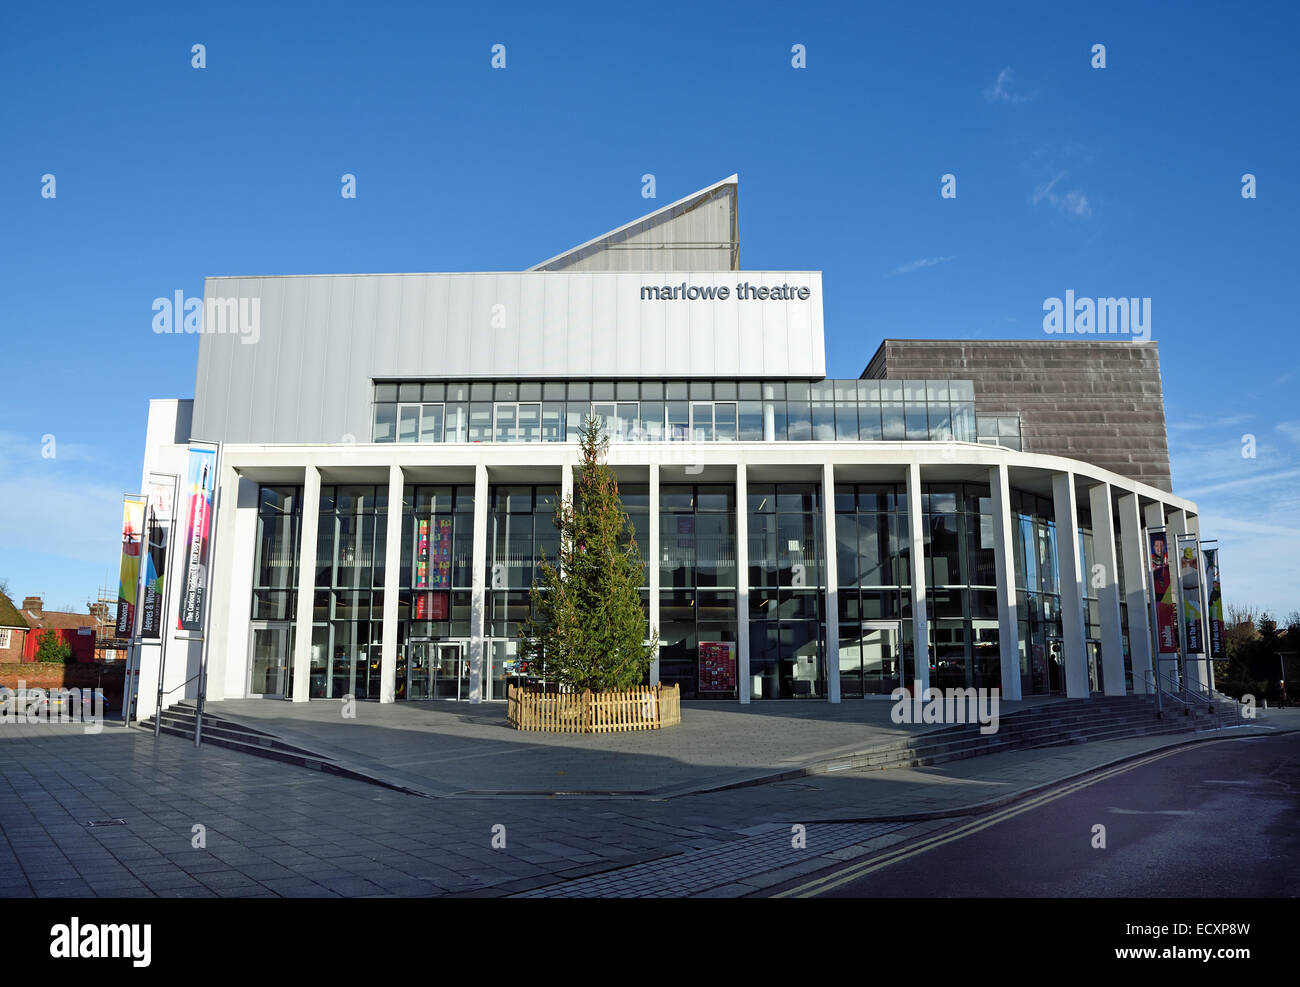 The Marlowe Theatre in Canterbury, Kent, UK is a modern venue opened in 2011. Stock Photo